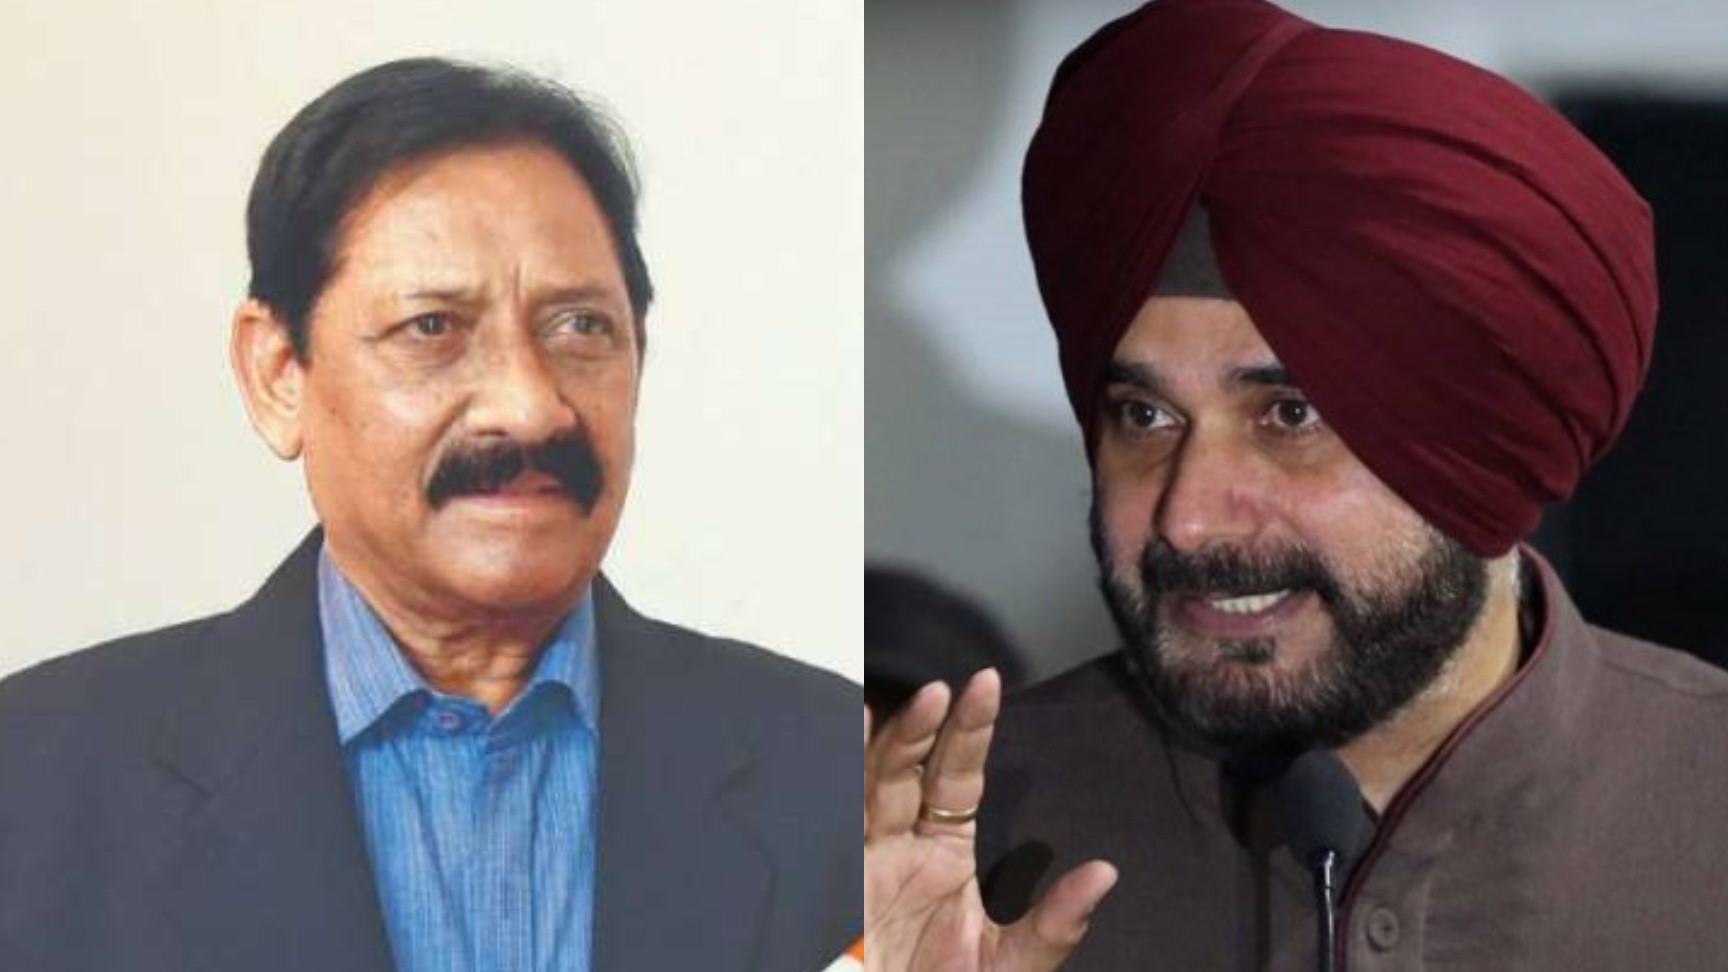 Chetan Chauhan once saved his Sikh teammates from a mob during the 1984 riots in Delhi